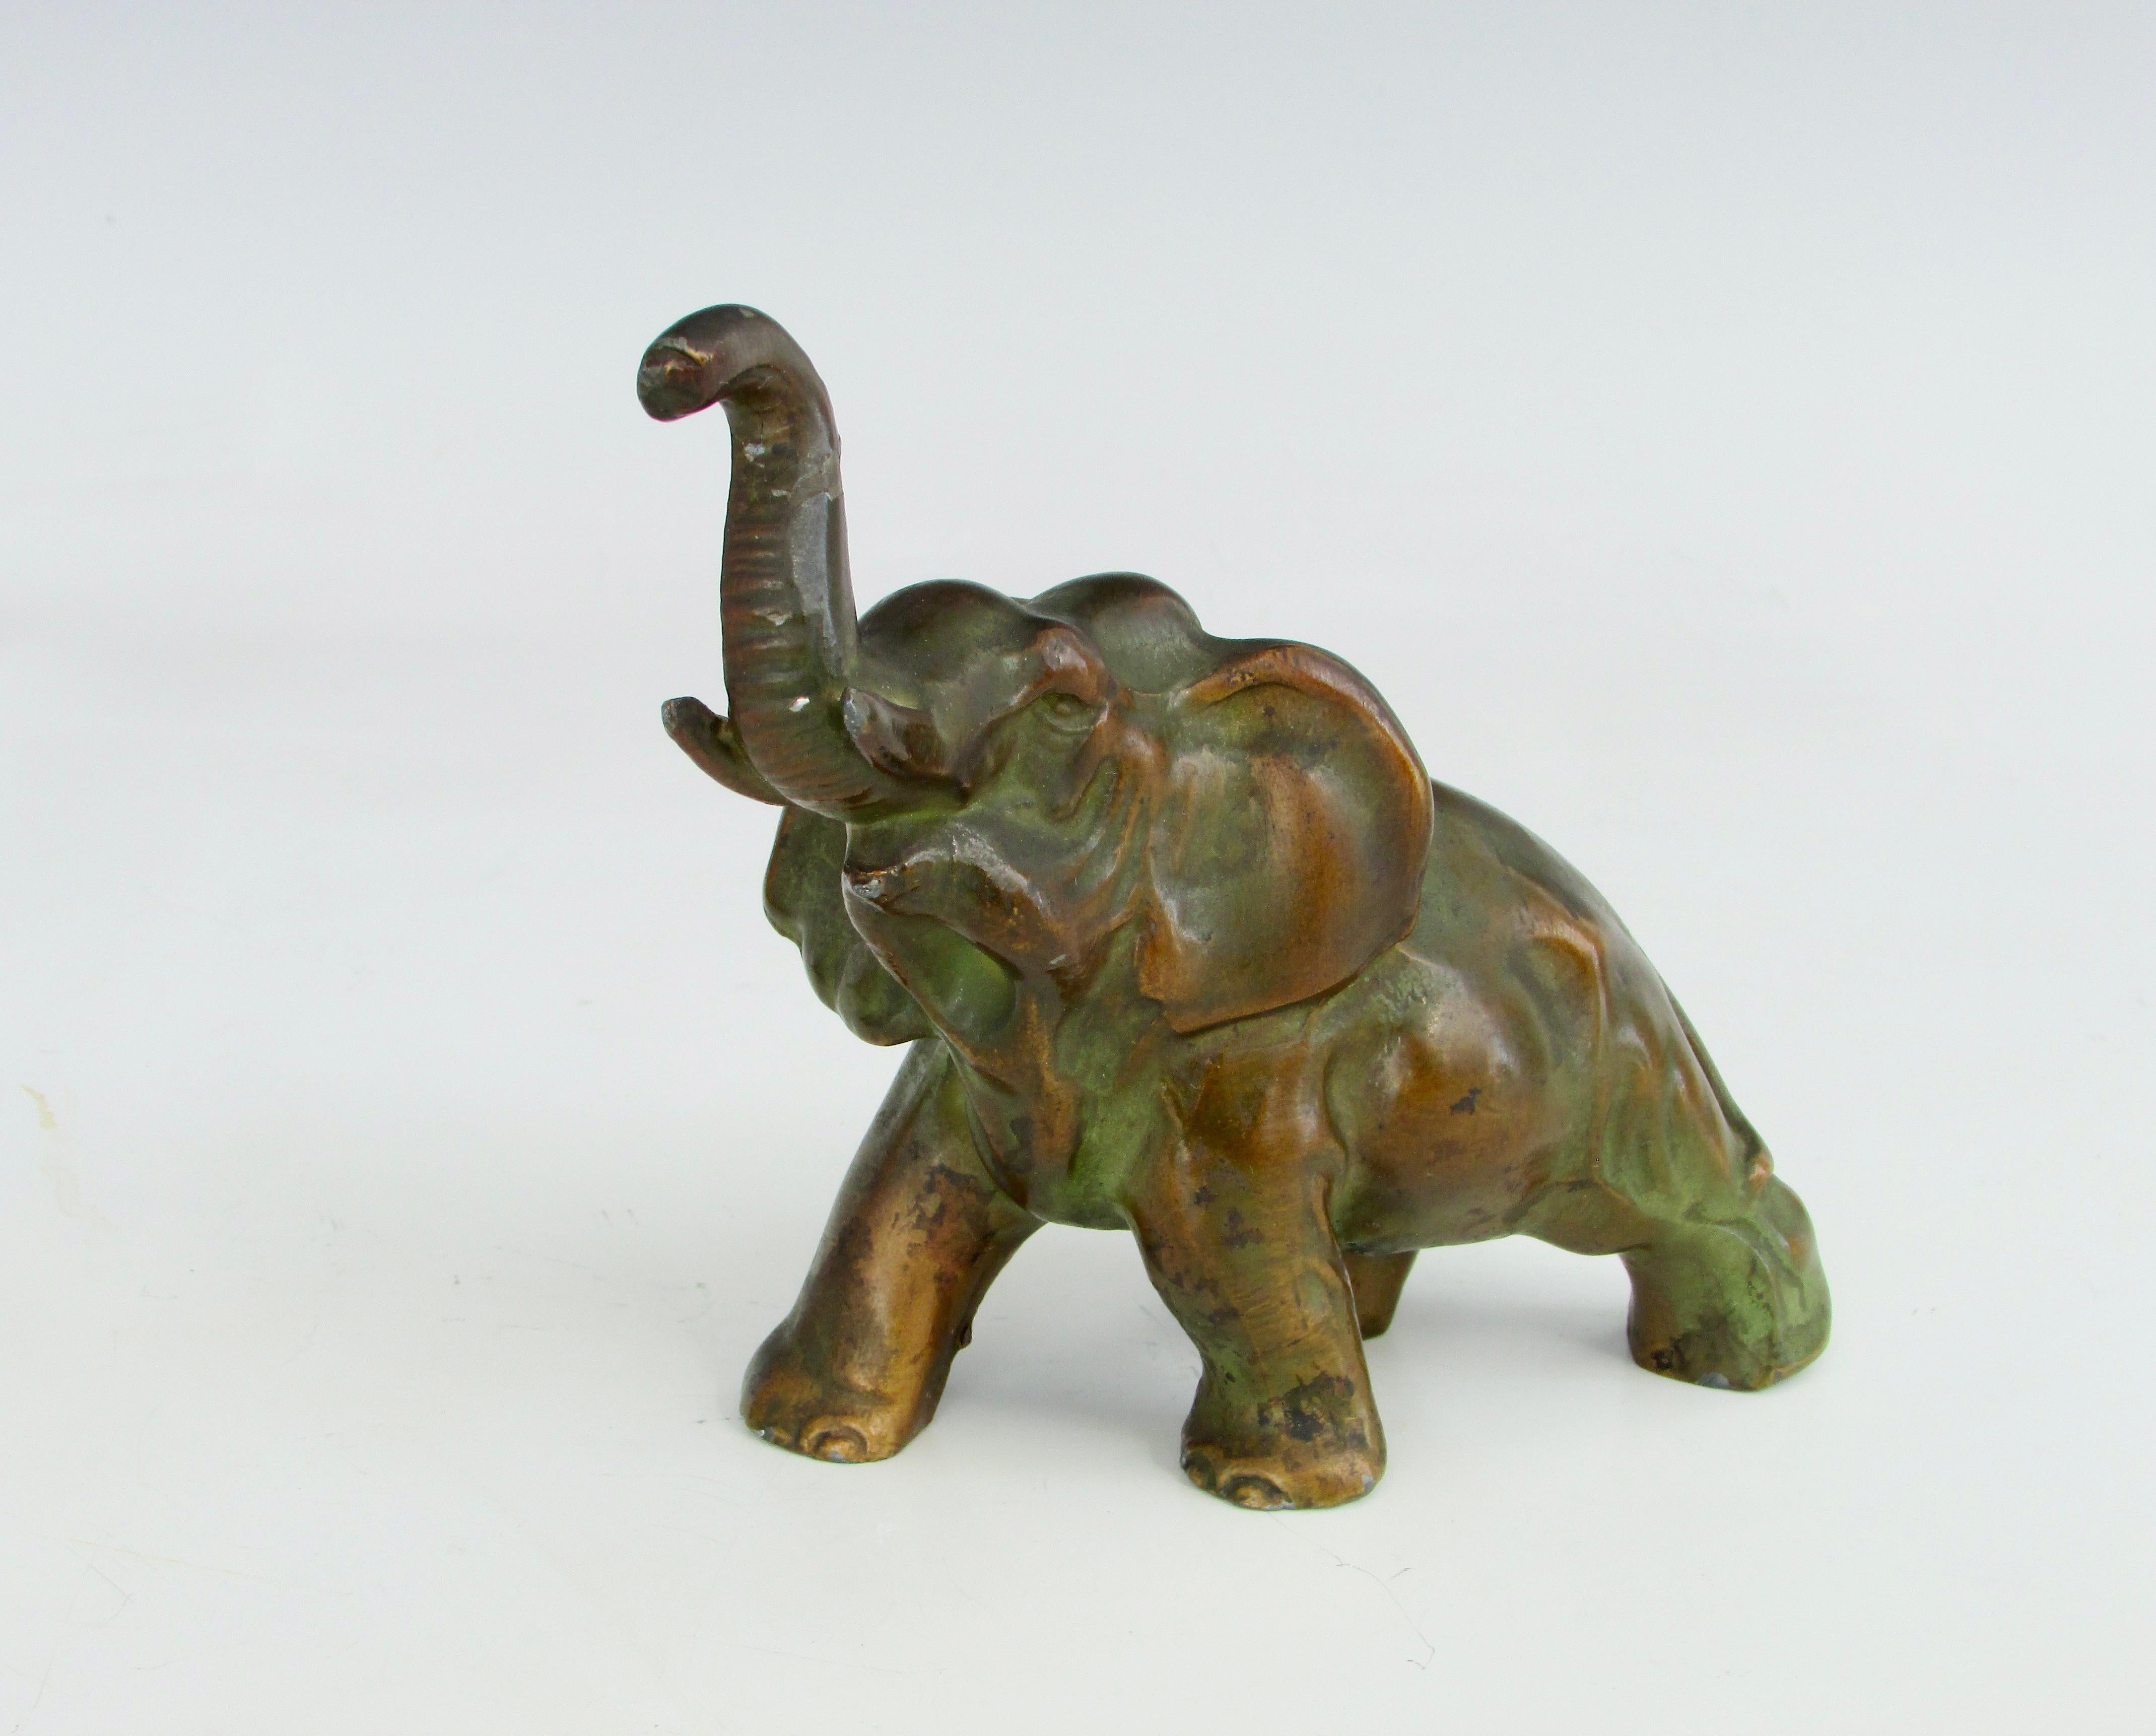 Nicely detailed diminutive elephant sculpture cast in bronze.